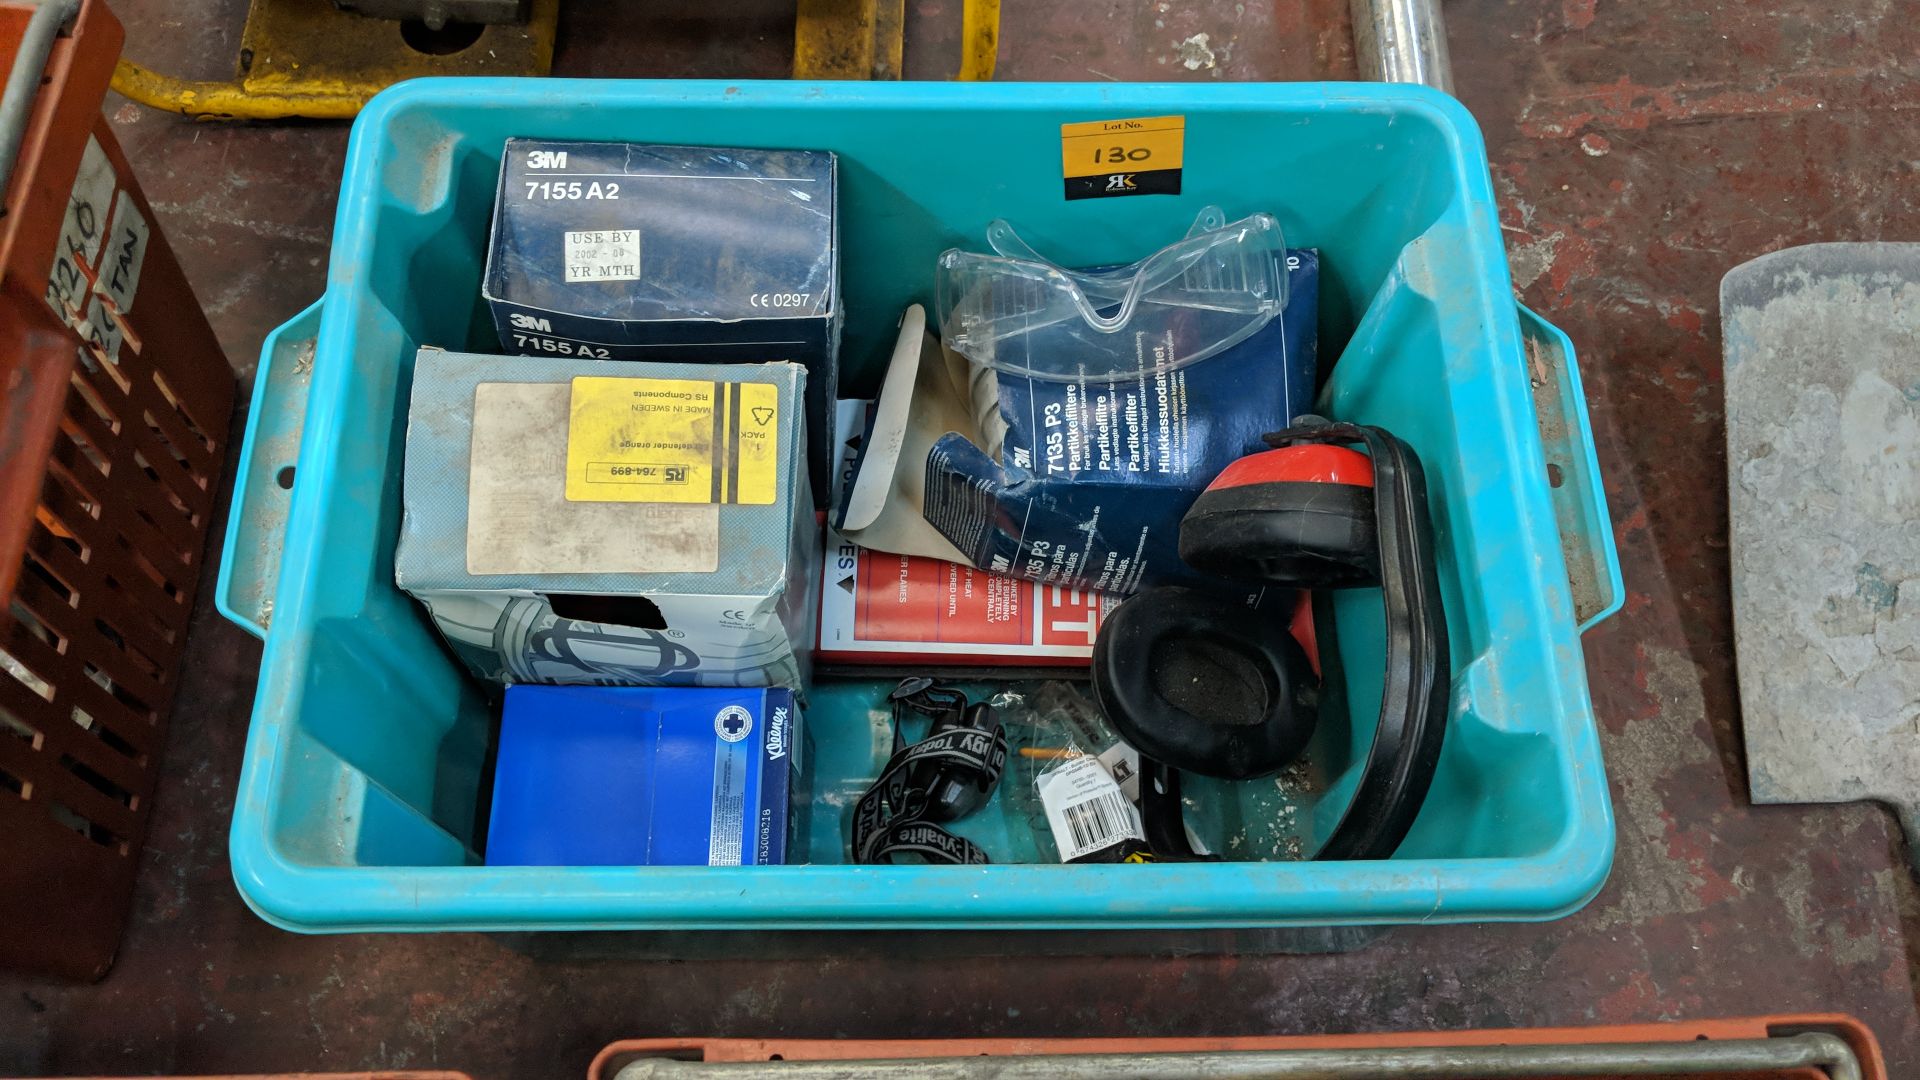 Contents of a crate of ear defenders, safety goggles & other safety related items